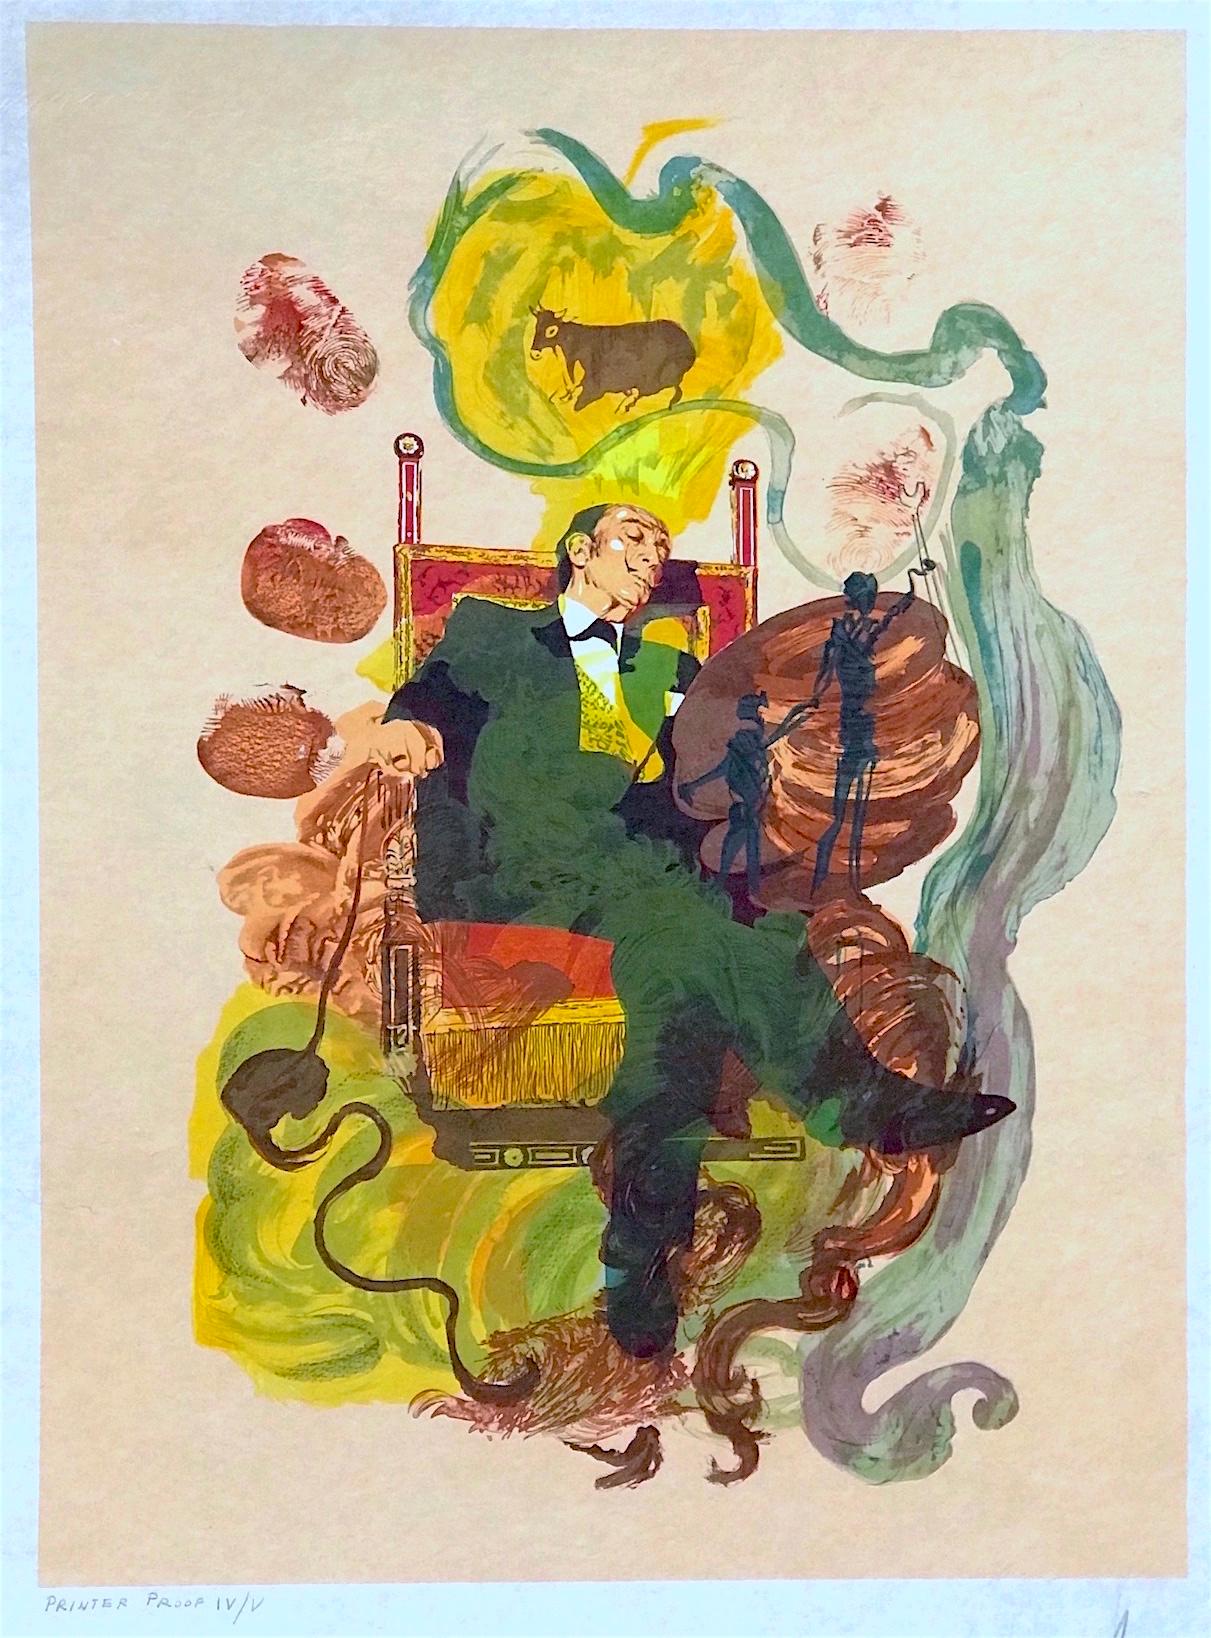 DALI DREAMS (KING OF COINS) 1978 Signed Lithograph on Japon Paper, Tarot Card  - Print by Salvador Dalí